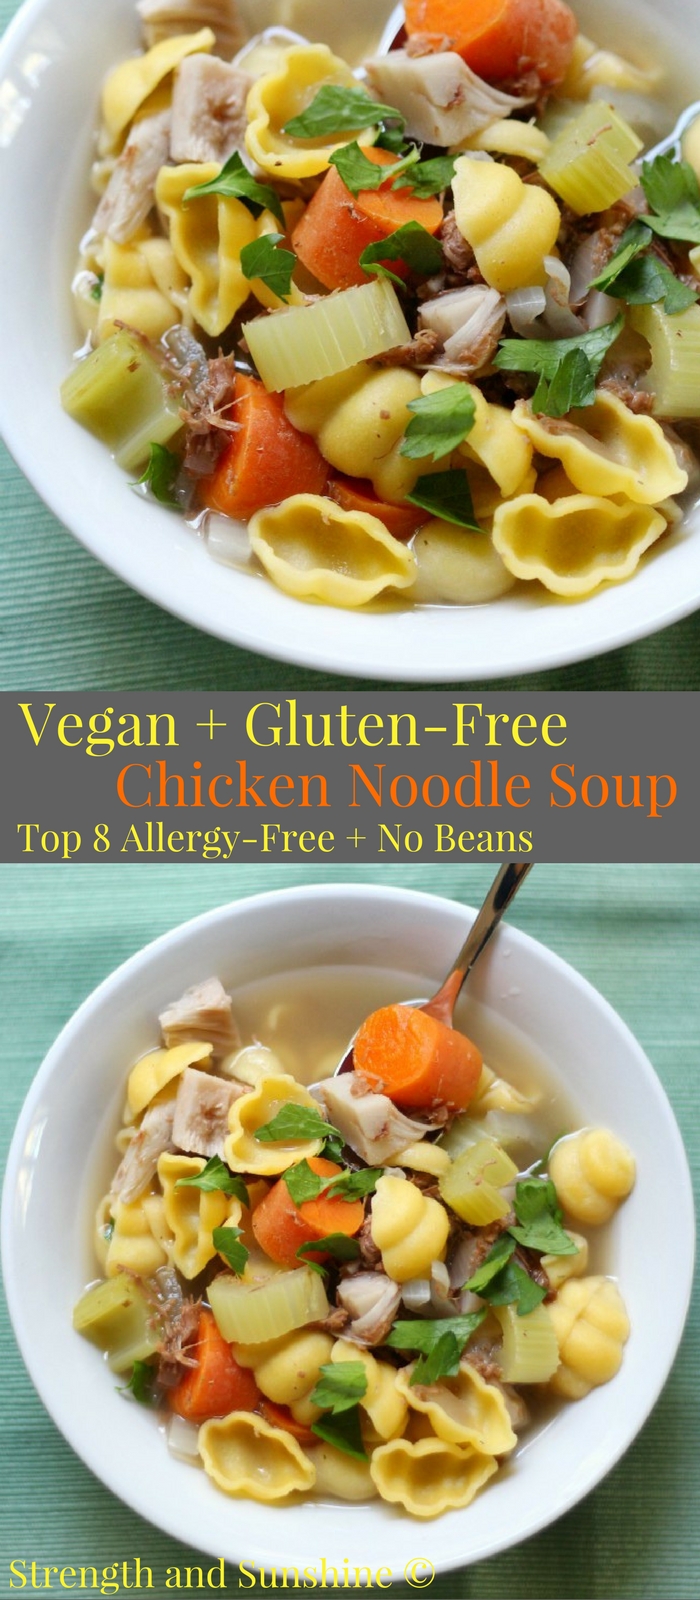 Vegan + Gluten-Free Chicken Noodle Soup (Allergy-Free, No Beans) | Strength and Sunshine @RebeccaGF666 Everyone loves a piping hot comforting bowl of classic chicken noodle soup! But this healthy & veggie-packed recipe is for Vegan & Gluten-Free Chicken Noodle Soup; top 8 allergy-free, no beans, and a mock ingredient you'd never guess! This cozy soup will nourish and soothe the soul! #soup #chickennoodlesoup #chickensoup #glutenfree #vegan #allergyfree #jackfruit